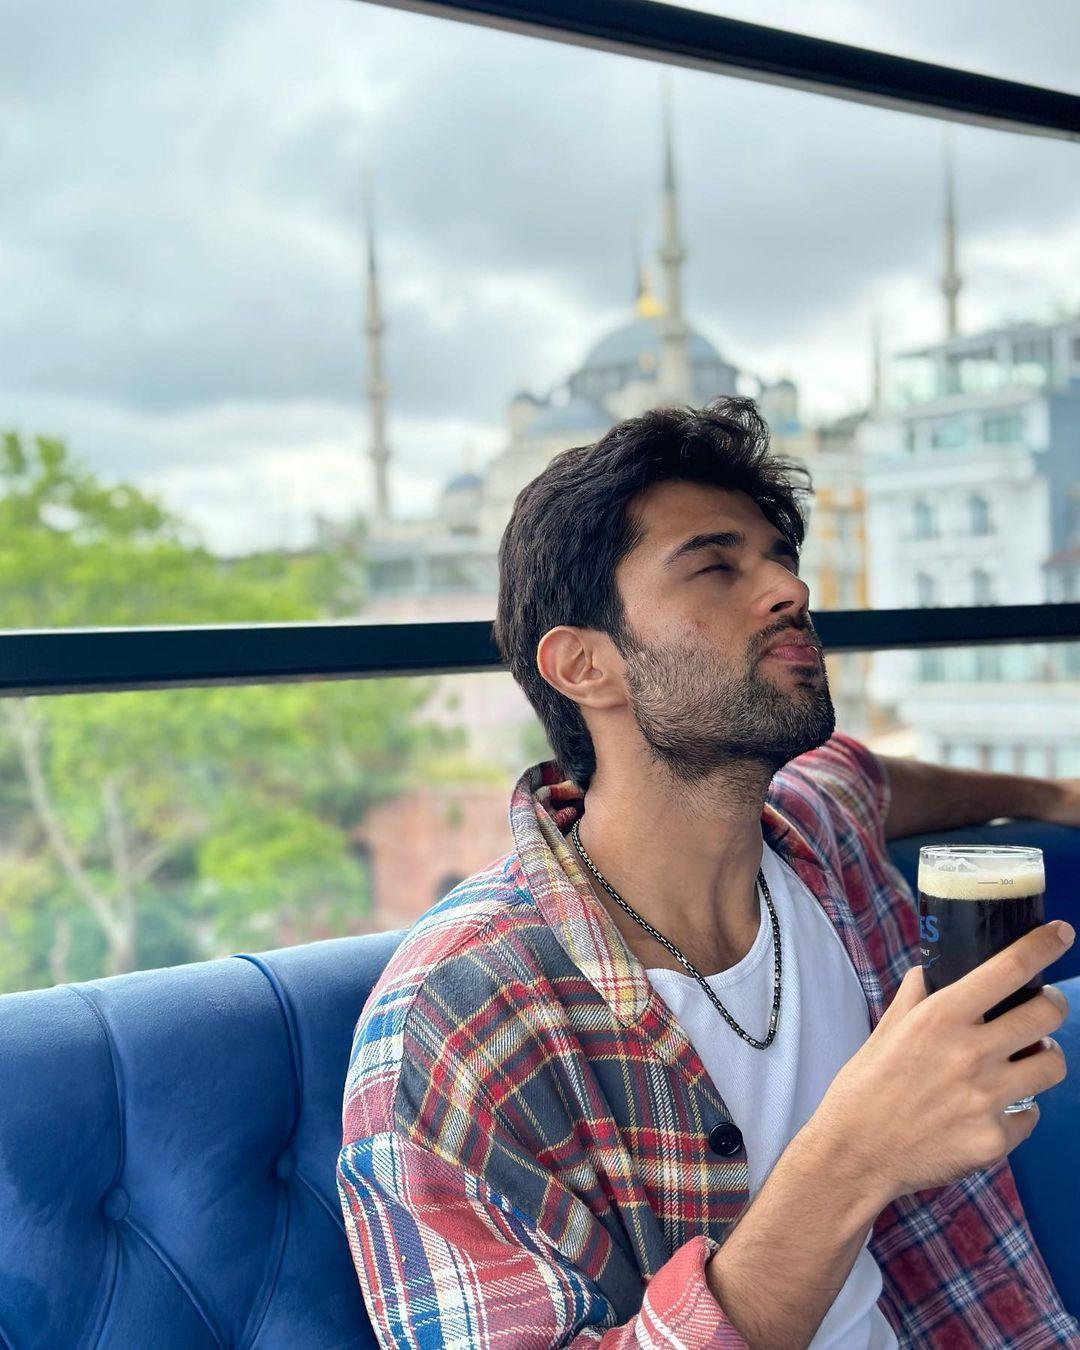 Vijay Deverakonda seems to favour white undershirts. He was spotted sporting a plaid overshirt buttoned down over one. It's definitely a smart choice for summer!